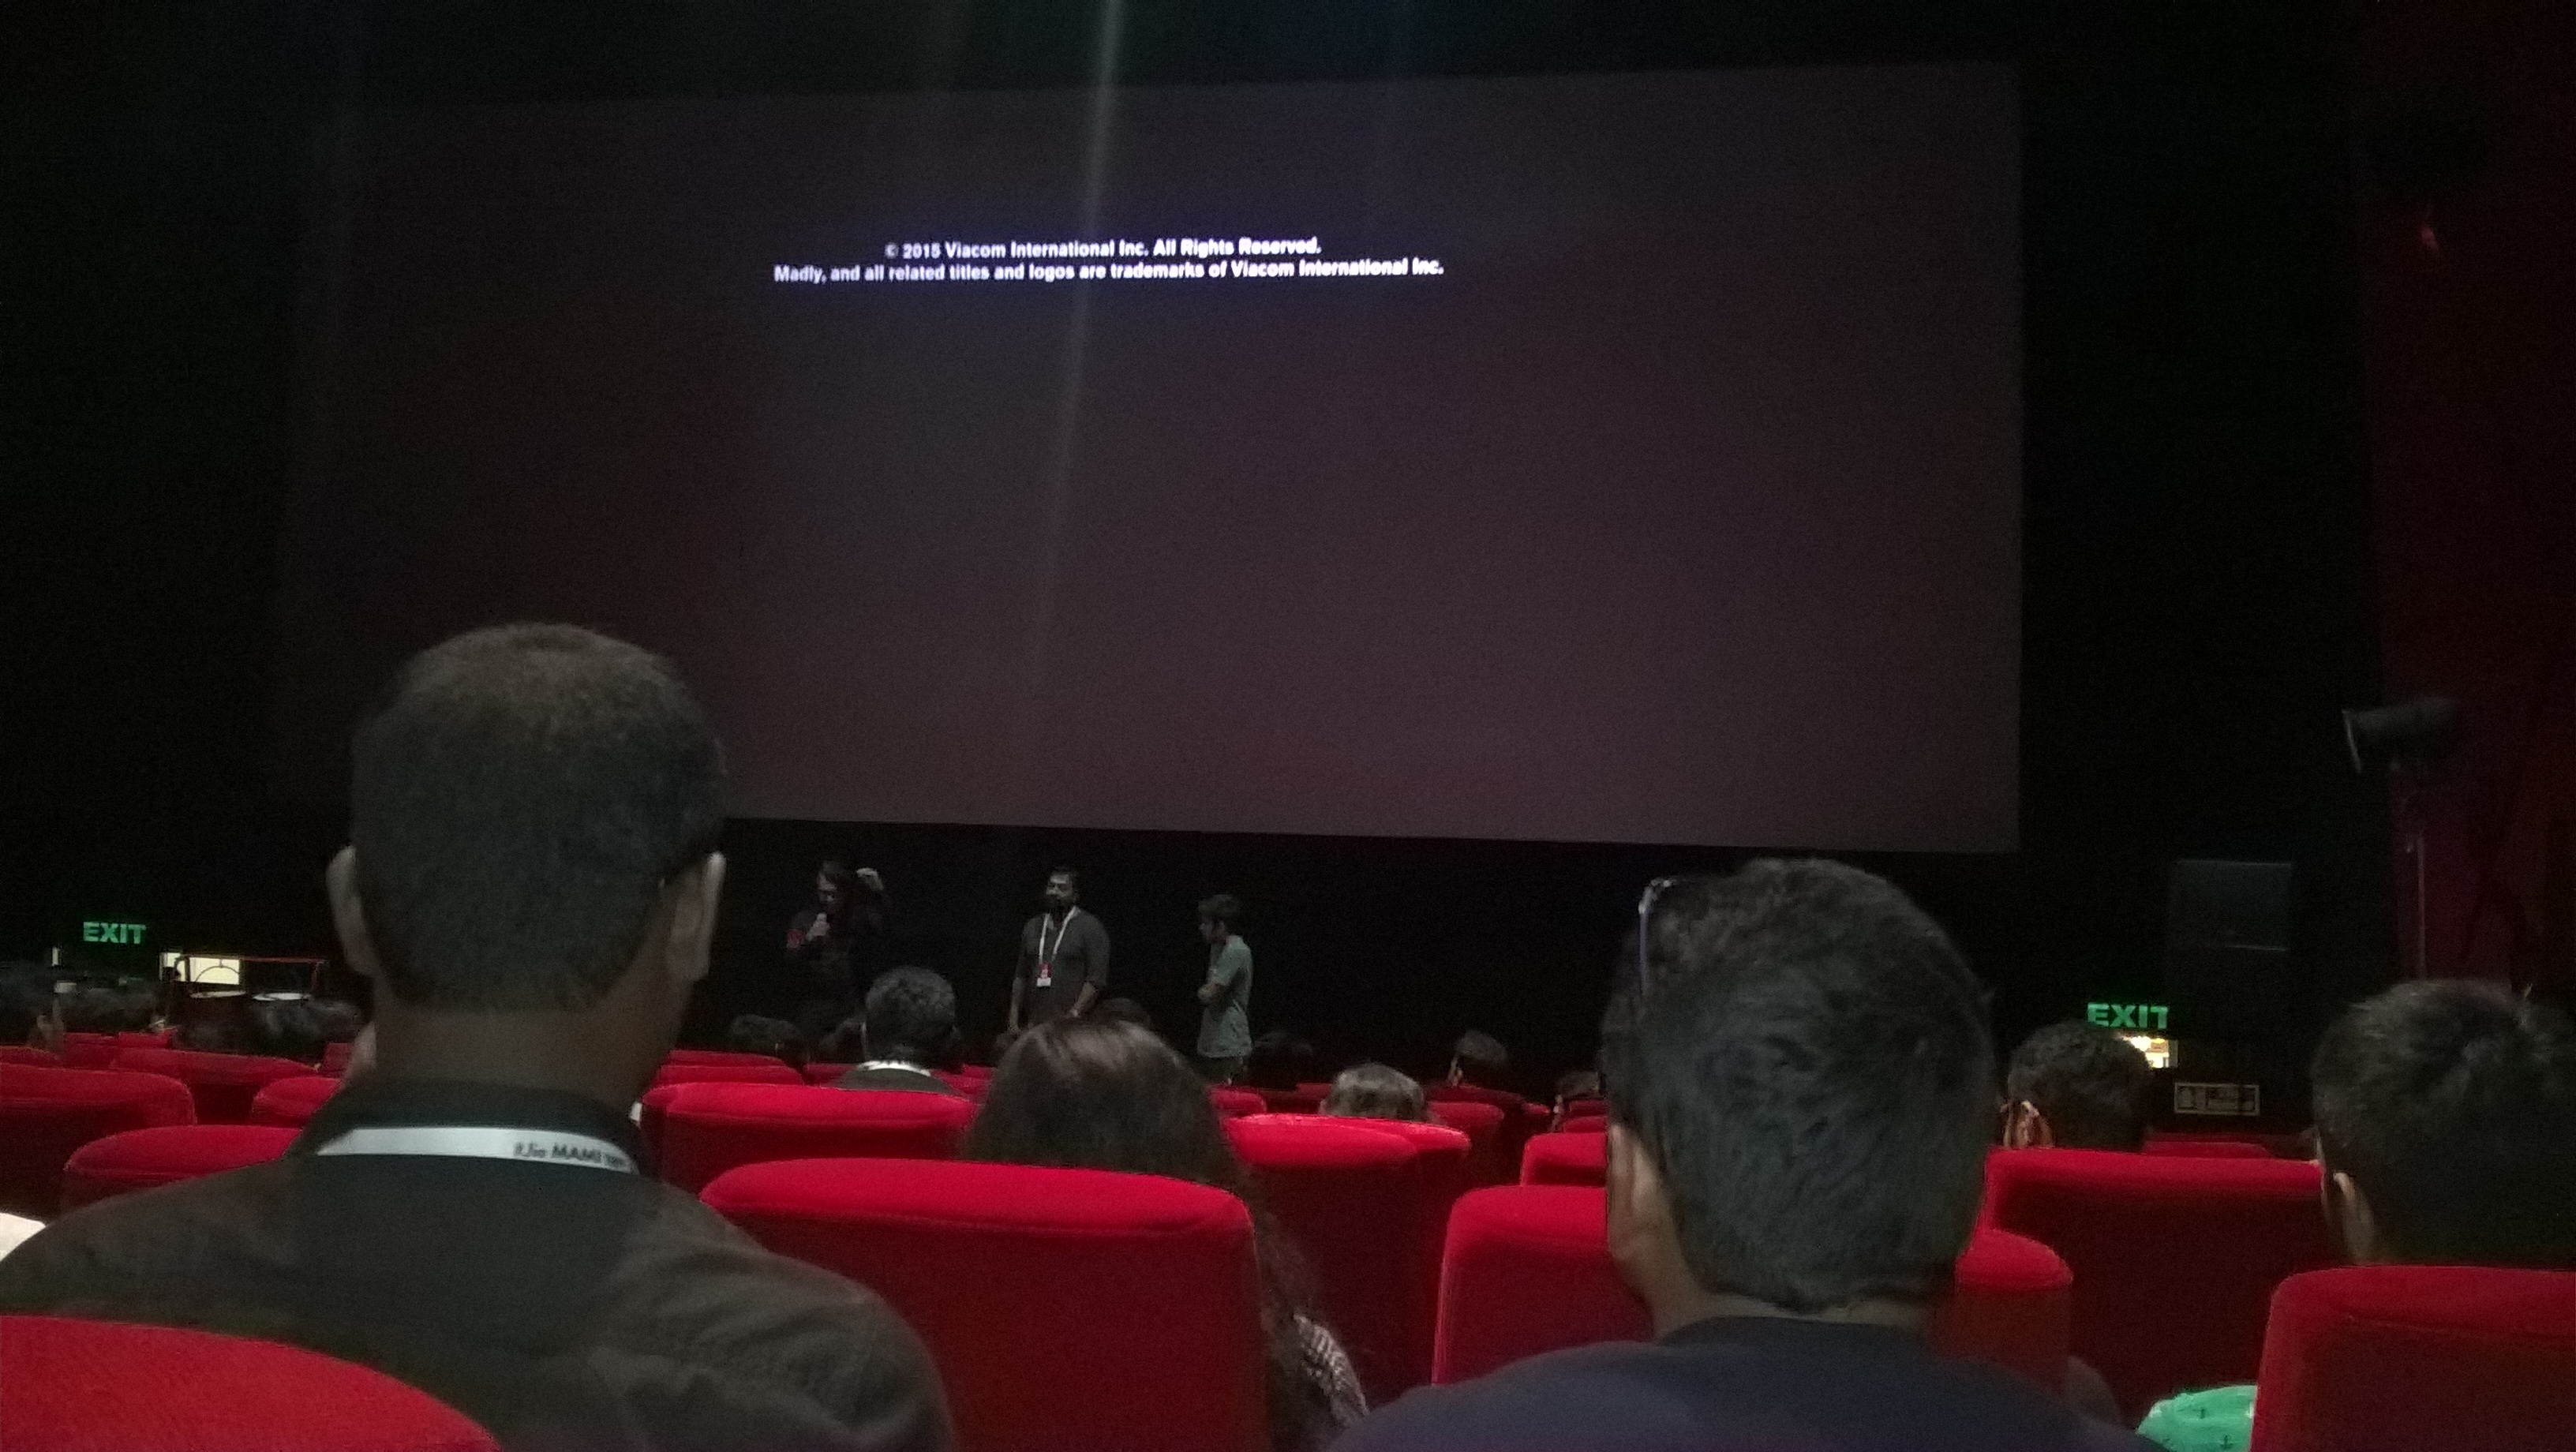 Anurag Kashyap at the Q & A session of Madly post it's screening at the Jio MAMI 18th Mumbai Film Festival